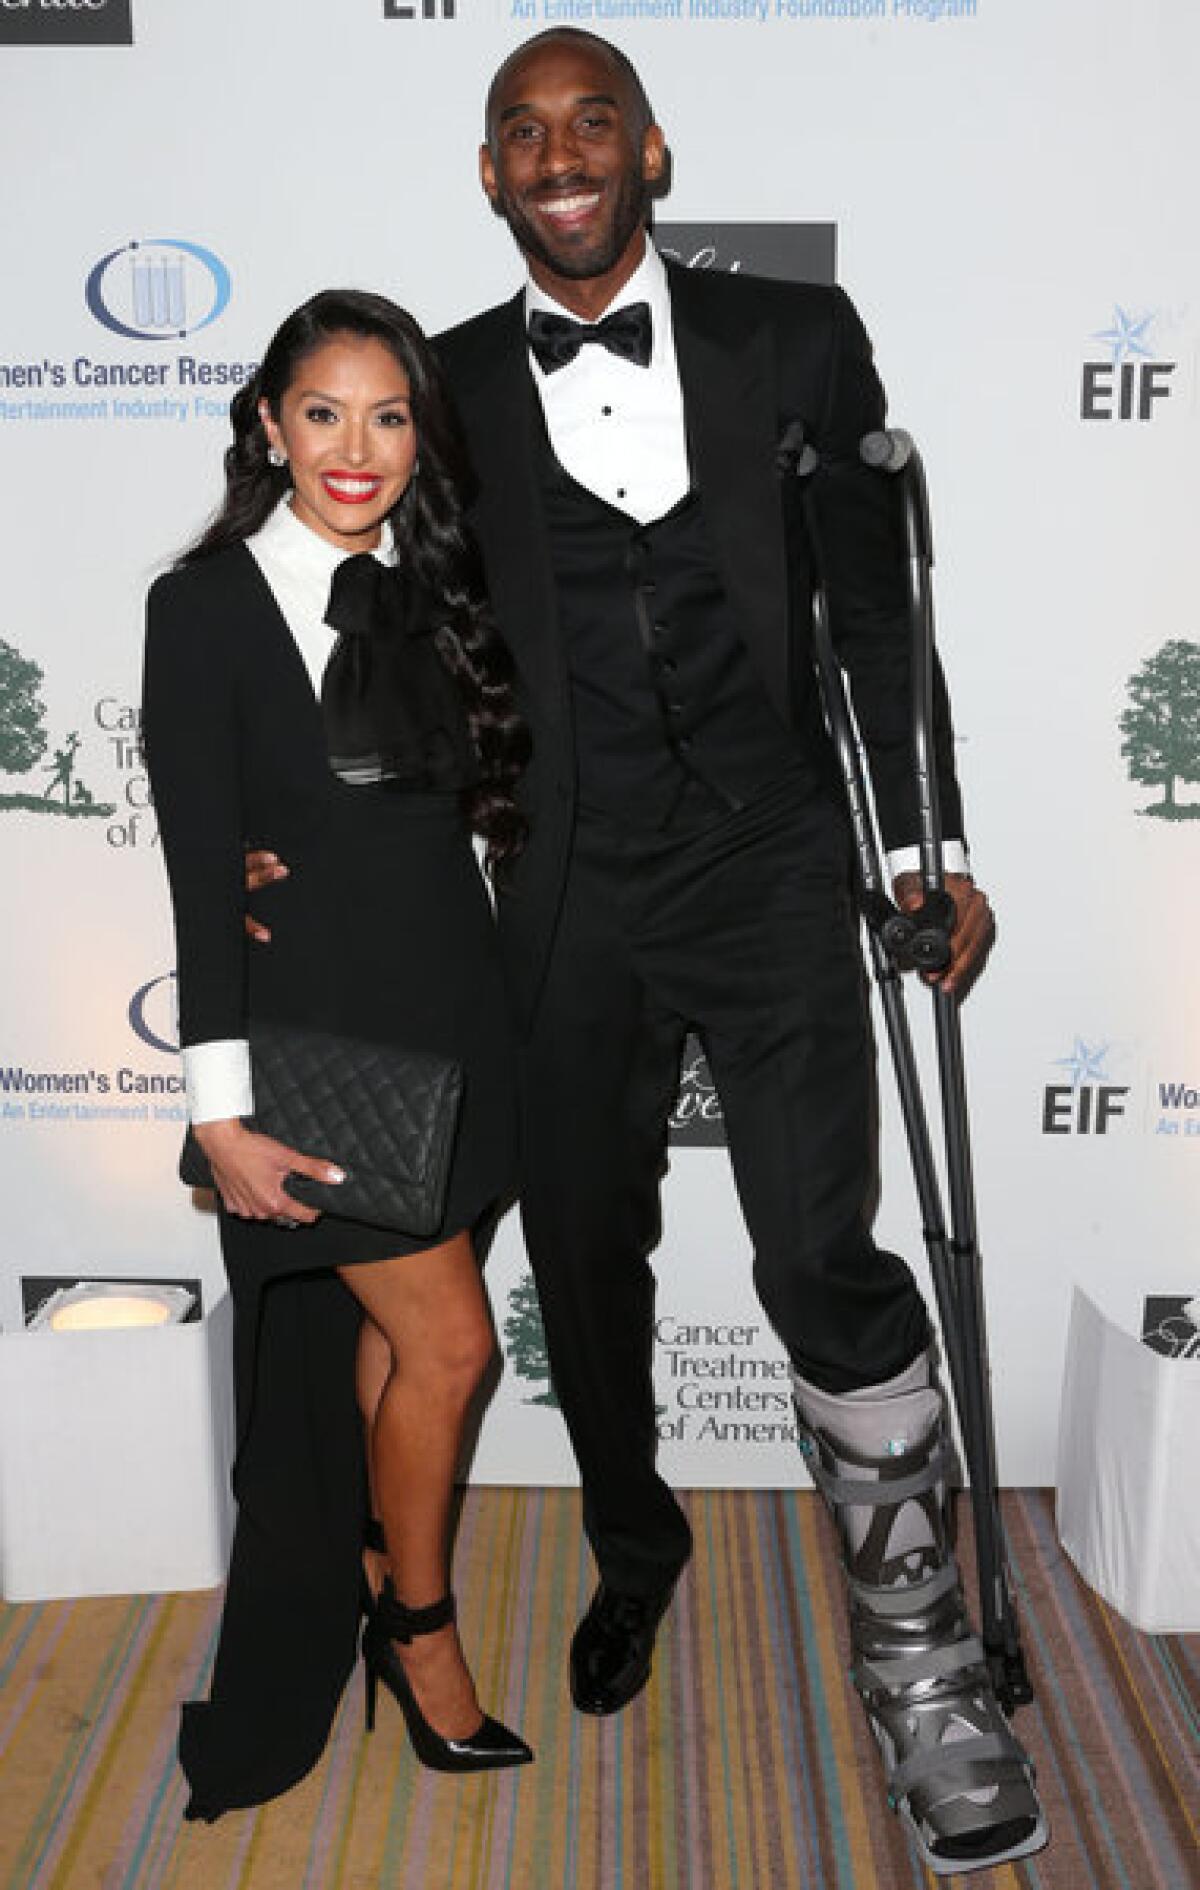 Kobe Bryant and his wife, Vanessa, attend the EIF Women's Cancer Research Fund's 16th annual "An Unforgettable Evening," presented by Saks Fifth Avenue.